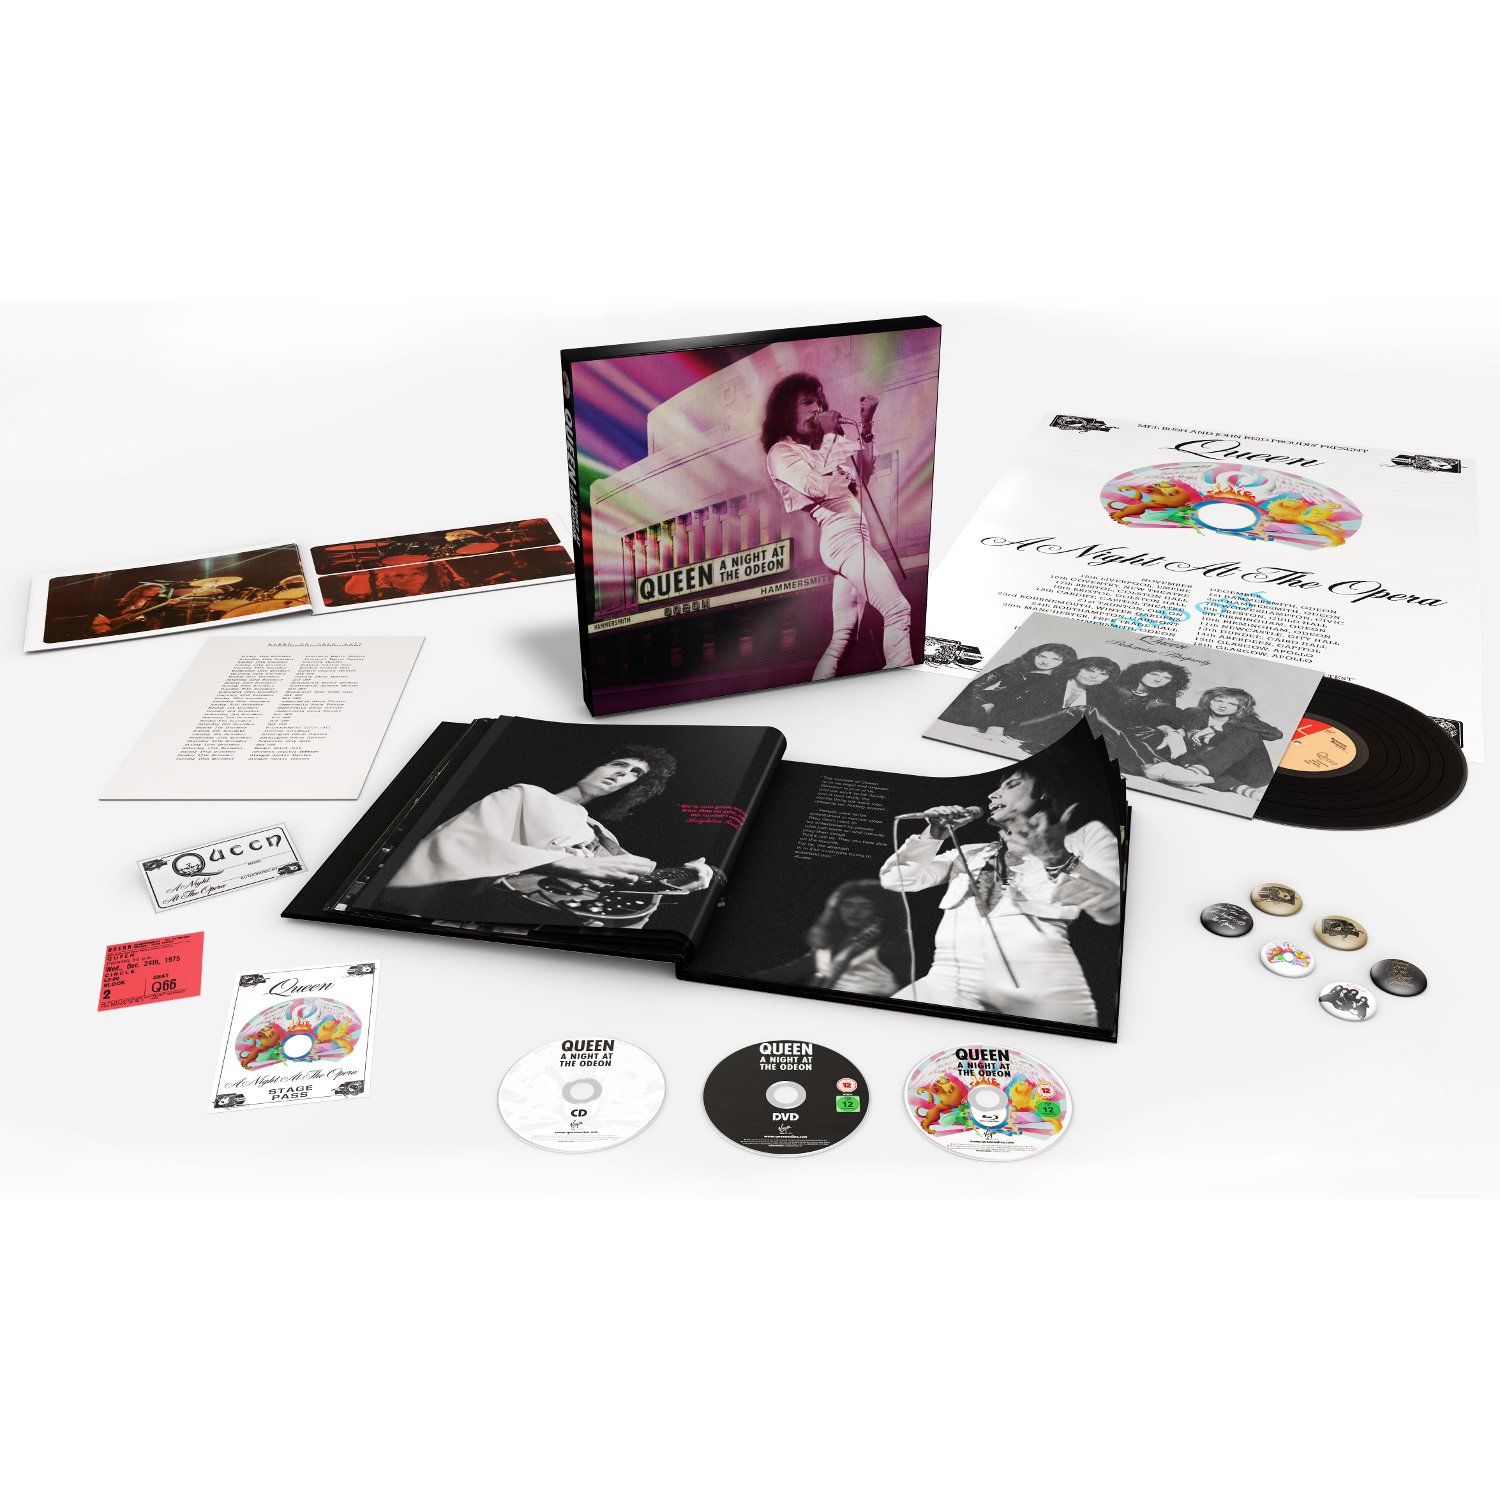 Queen - A Night At The Odeon - Hammersmith 1975 (Super Deluxe Box Set)